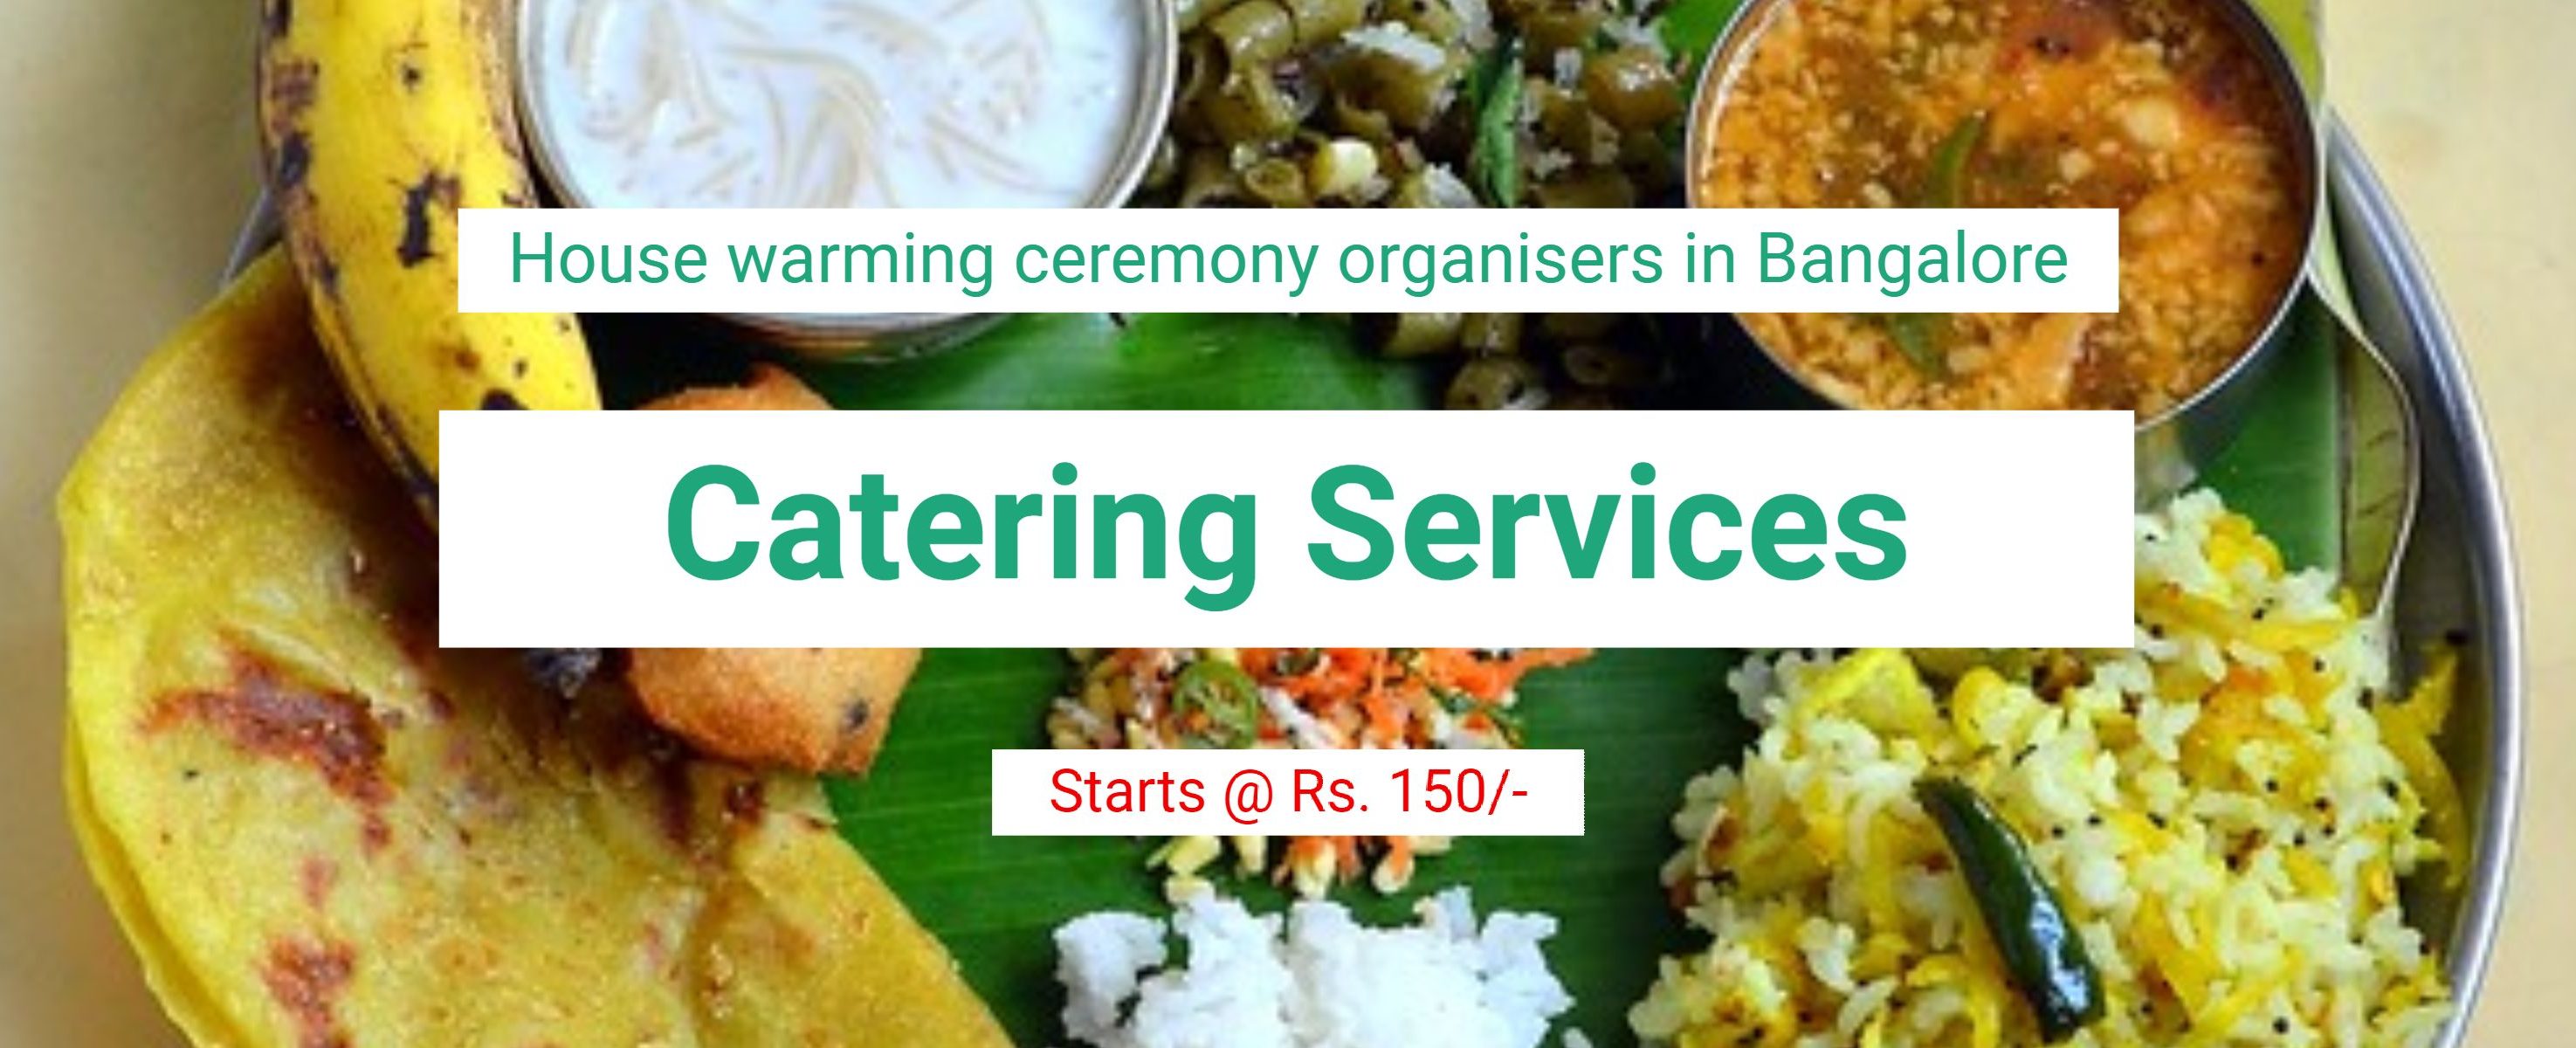 House warming ceremony catering in Bangalore